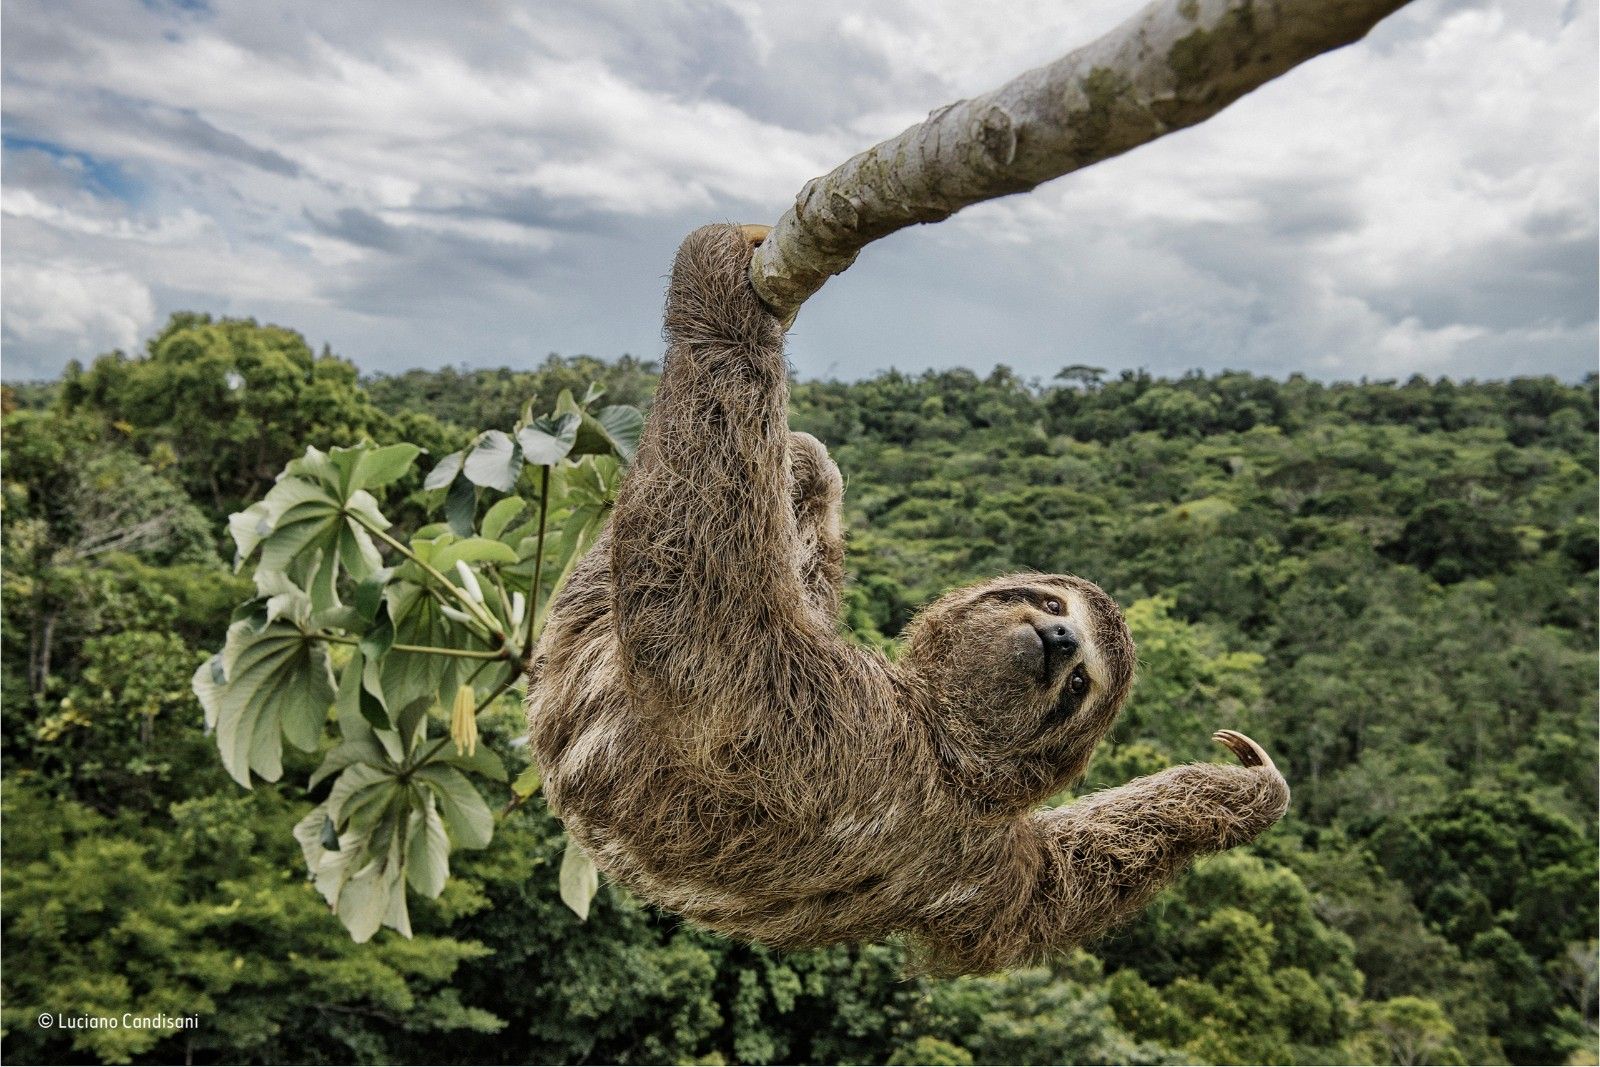 Incredible images from the Wildlife Photographer of the Year competition image 22